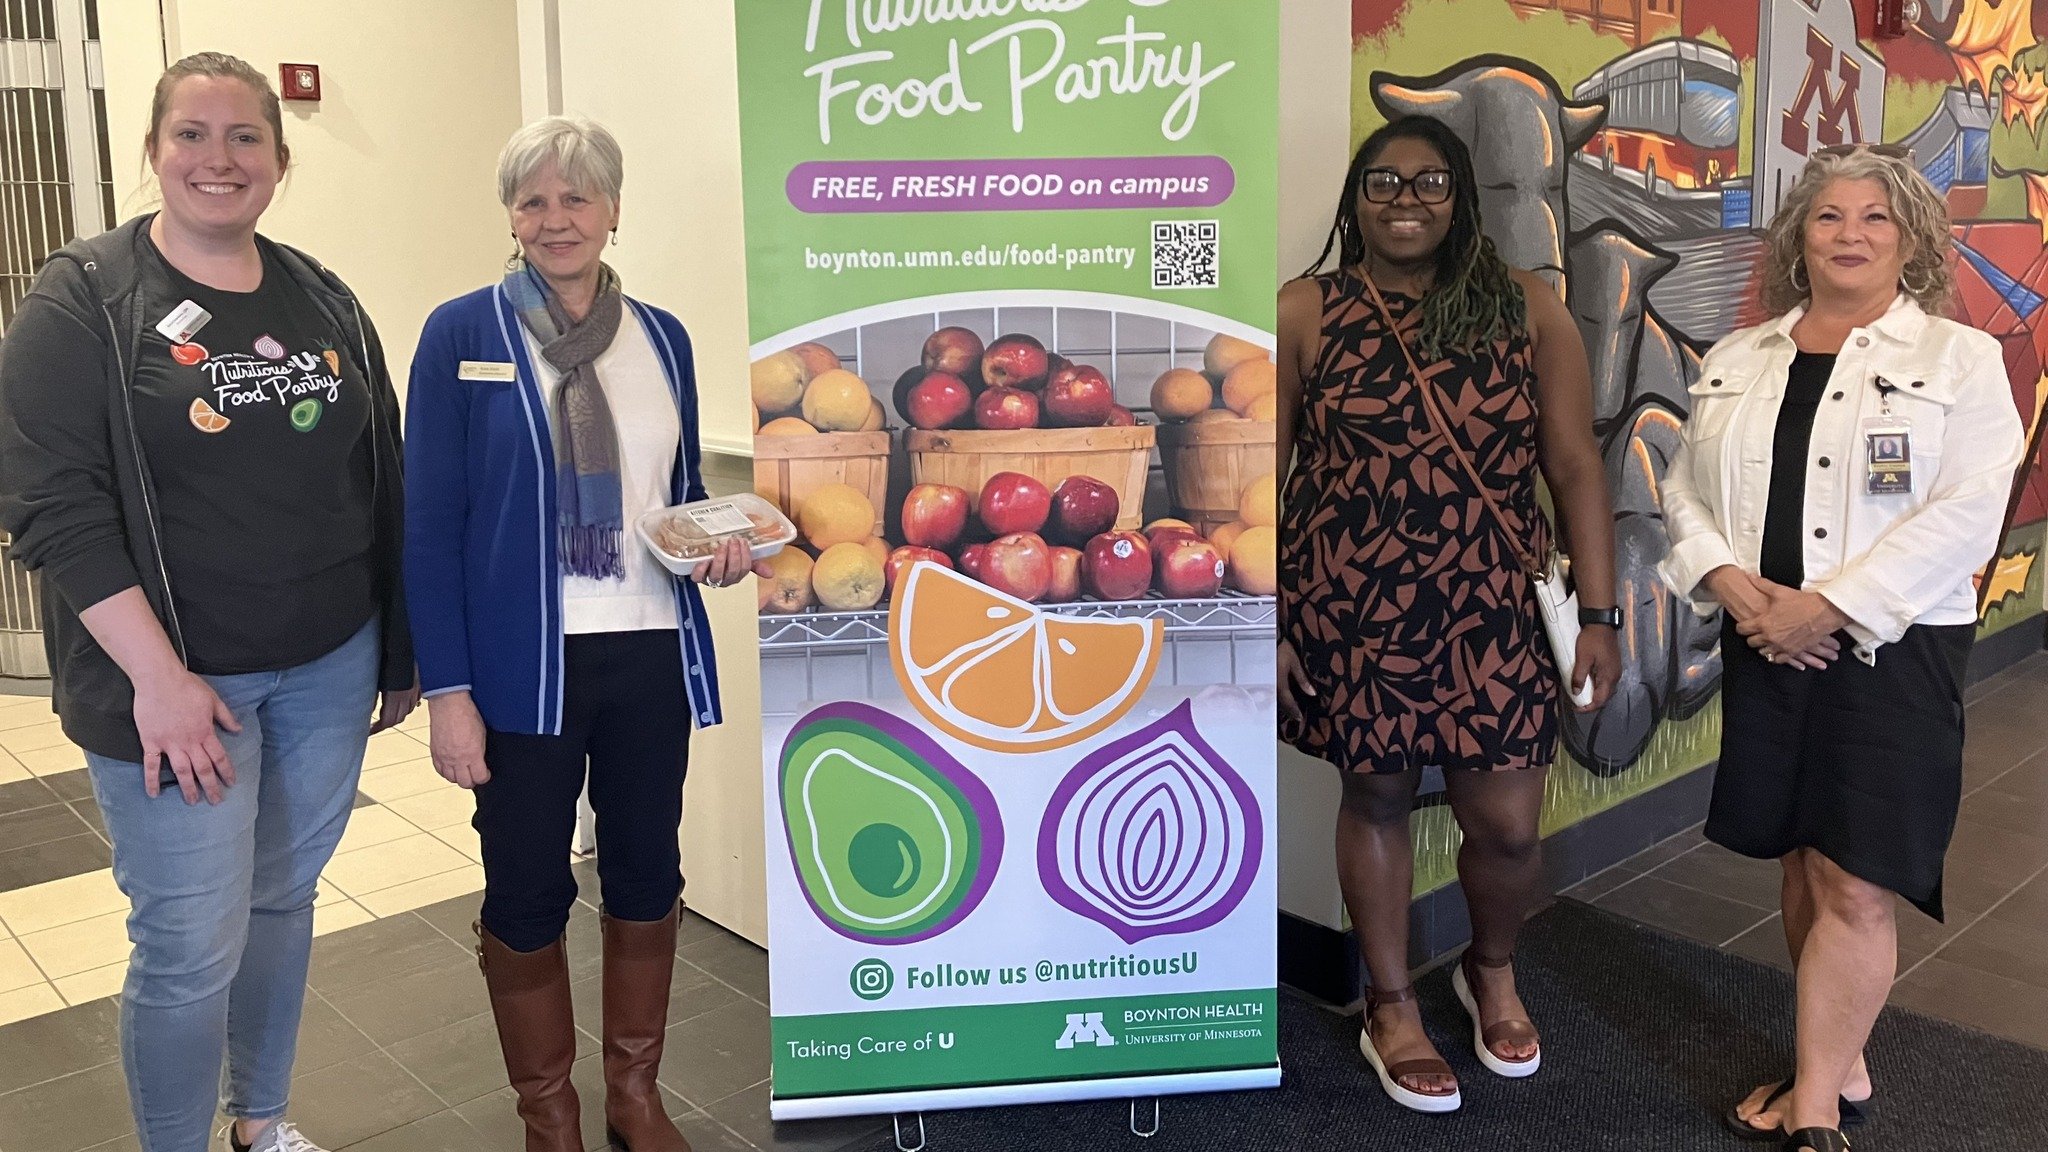 UMN round up from last week! Toured the @boyntonhealth food pantry to talk campus food insecurity.

Joined a panel @hsoca_umn and @gspec.umn with @elliottforward1, @jchavezmpls, @anikabowie and @cheniquajohnson on building the next generation of lead